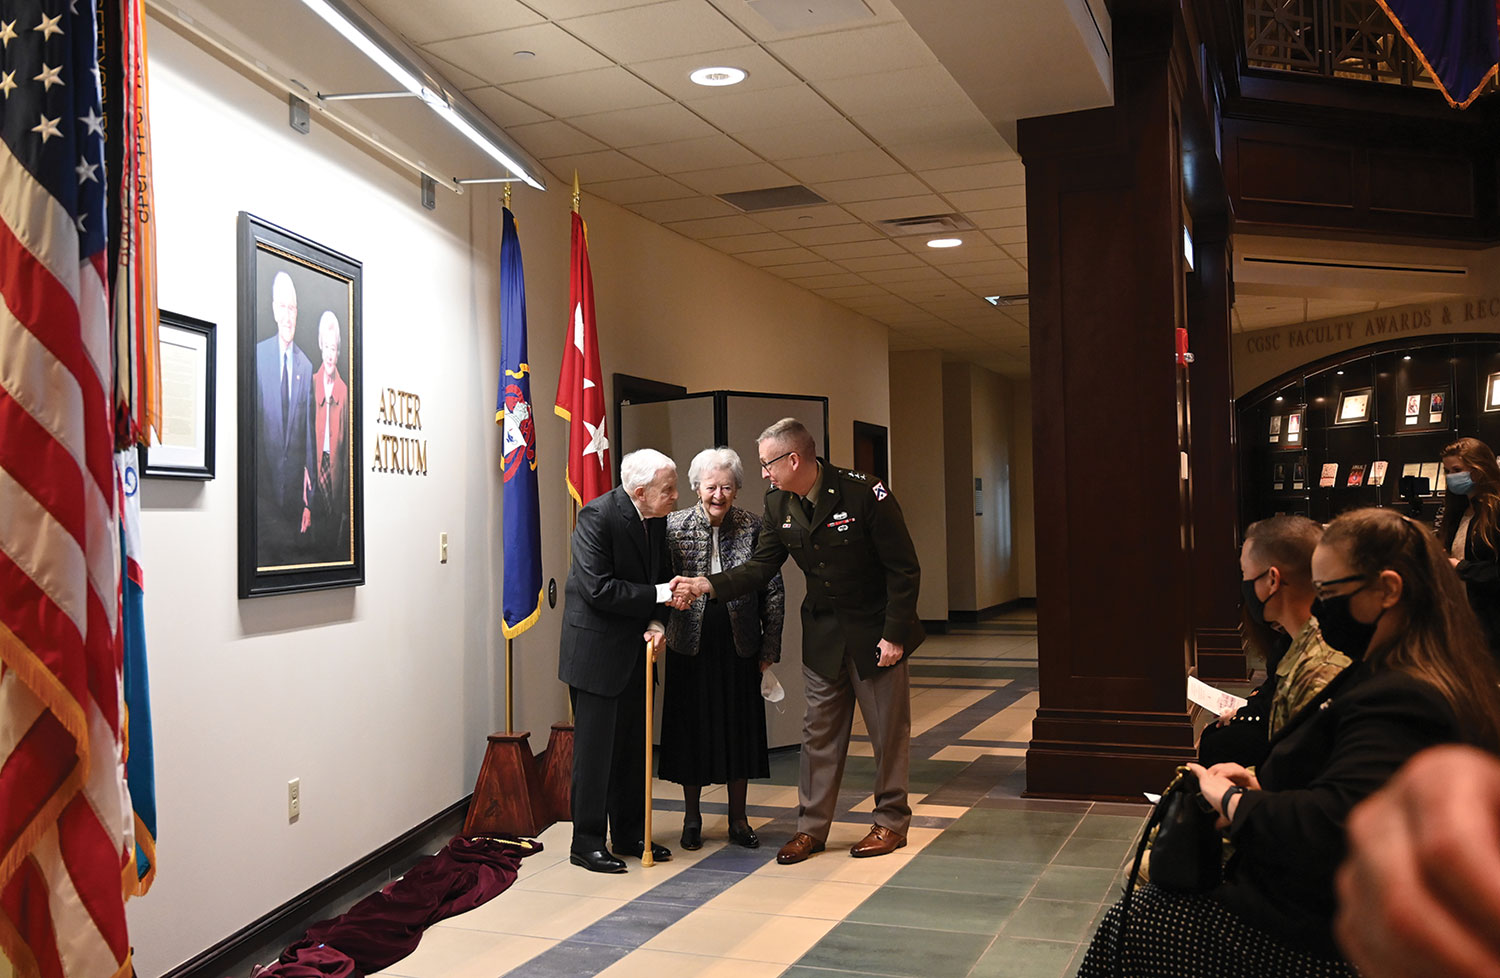 Lt. Gen. Theodore Martin, commanding general of Fort Leavenworth and the Combined Arms Center and commandant of the U.S. Army Command and General Staff College, congratulates the Arter’s after unveiling their portrait display in the Lewis and Clark Center atrium.